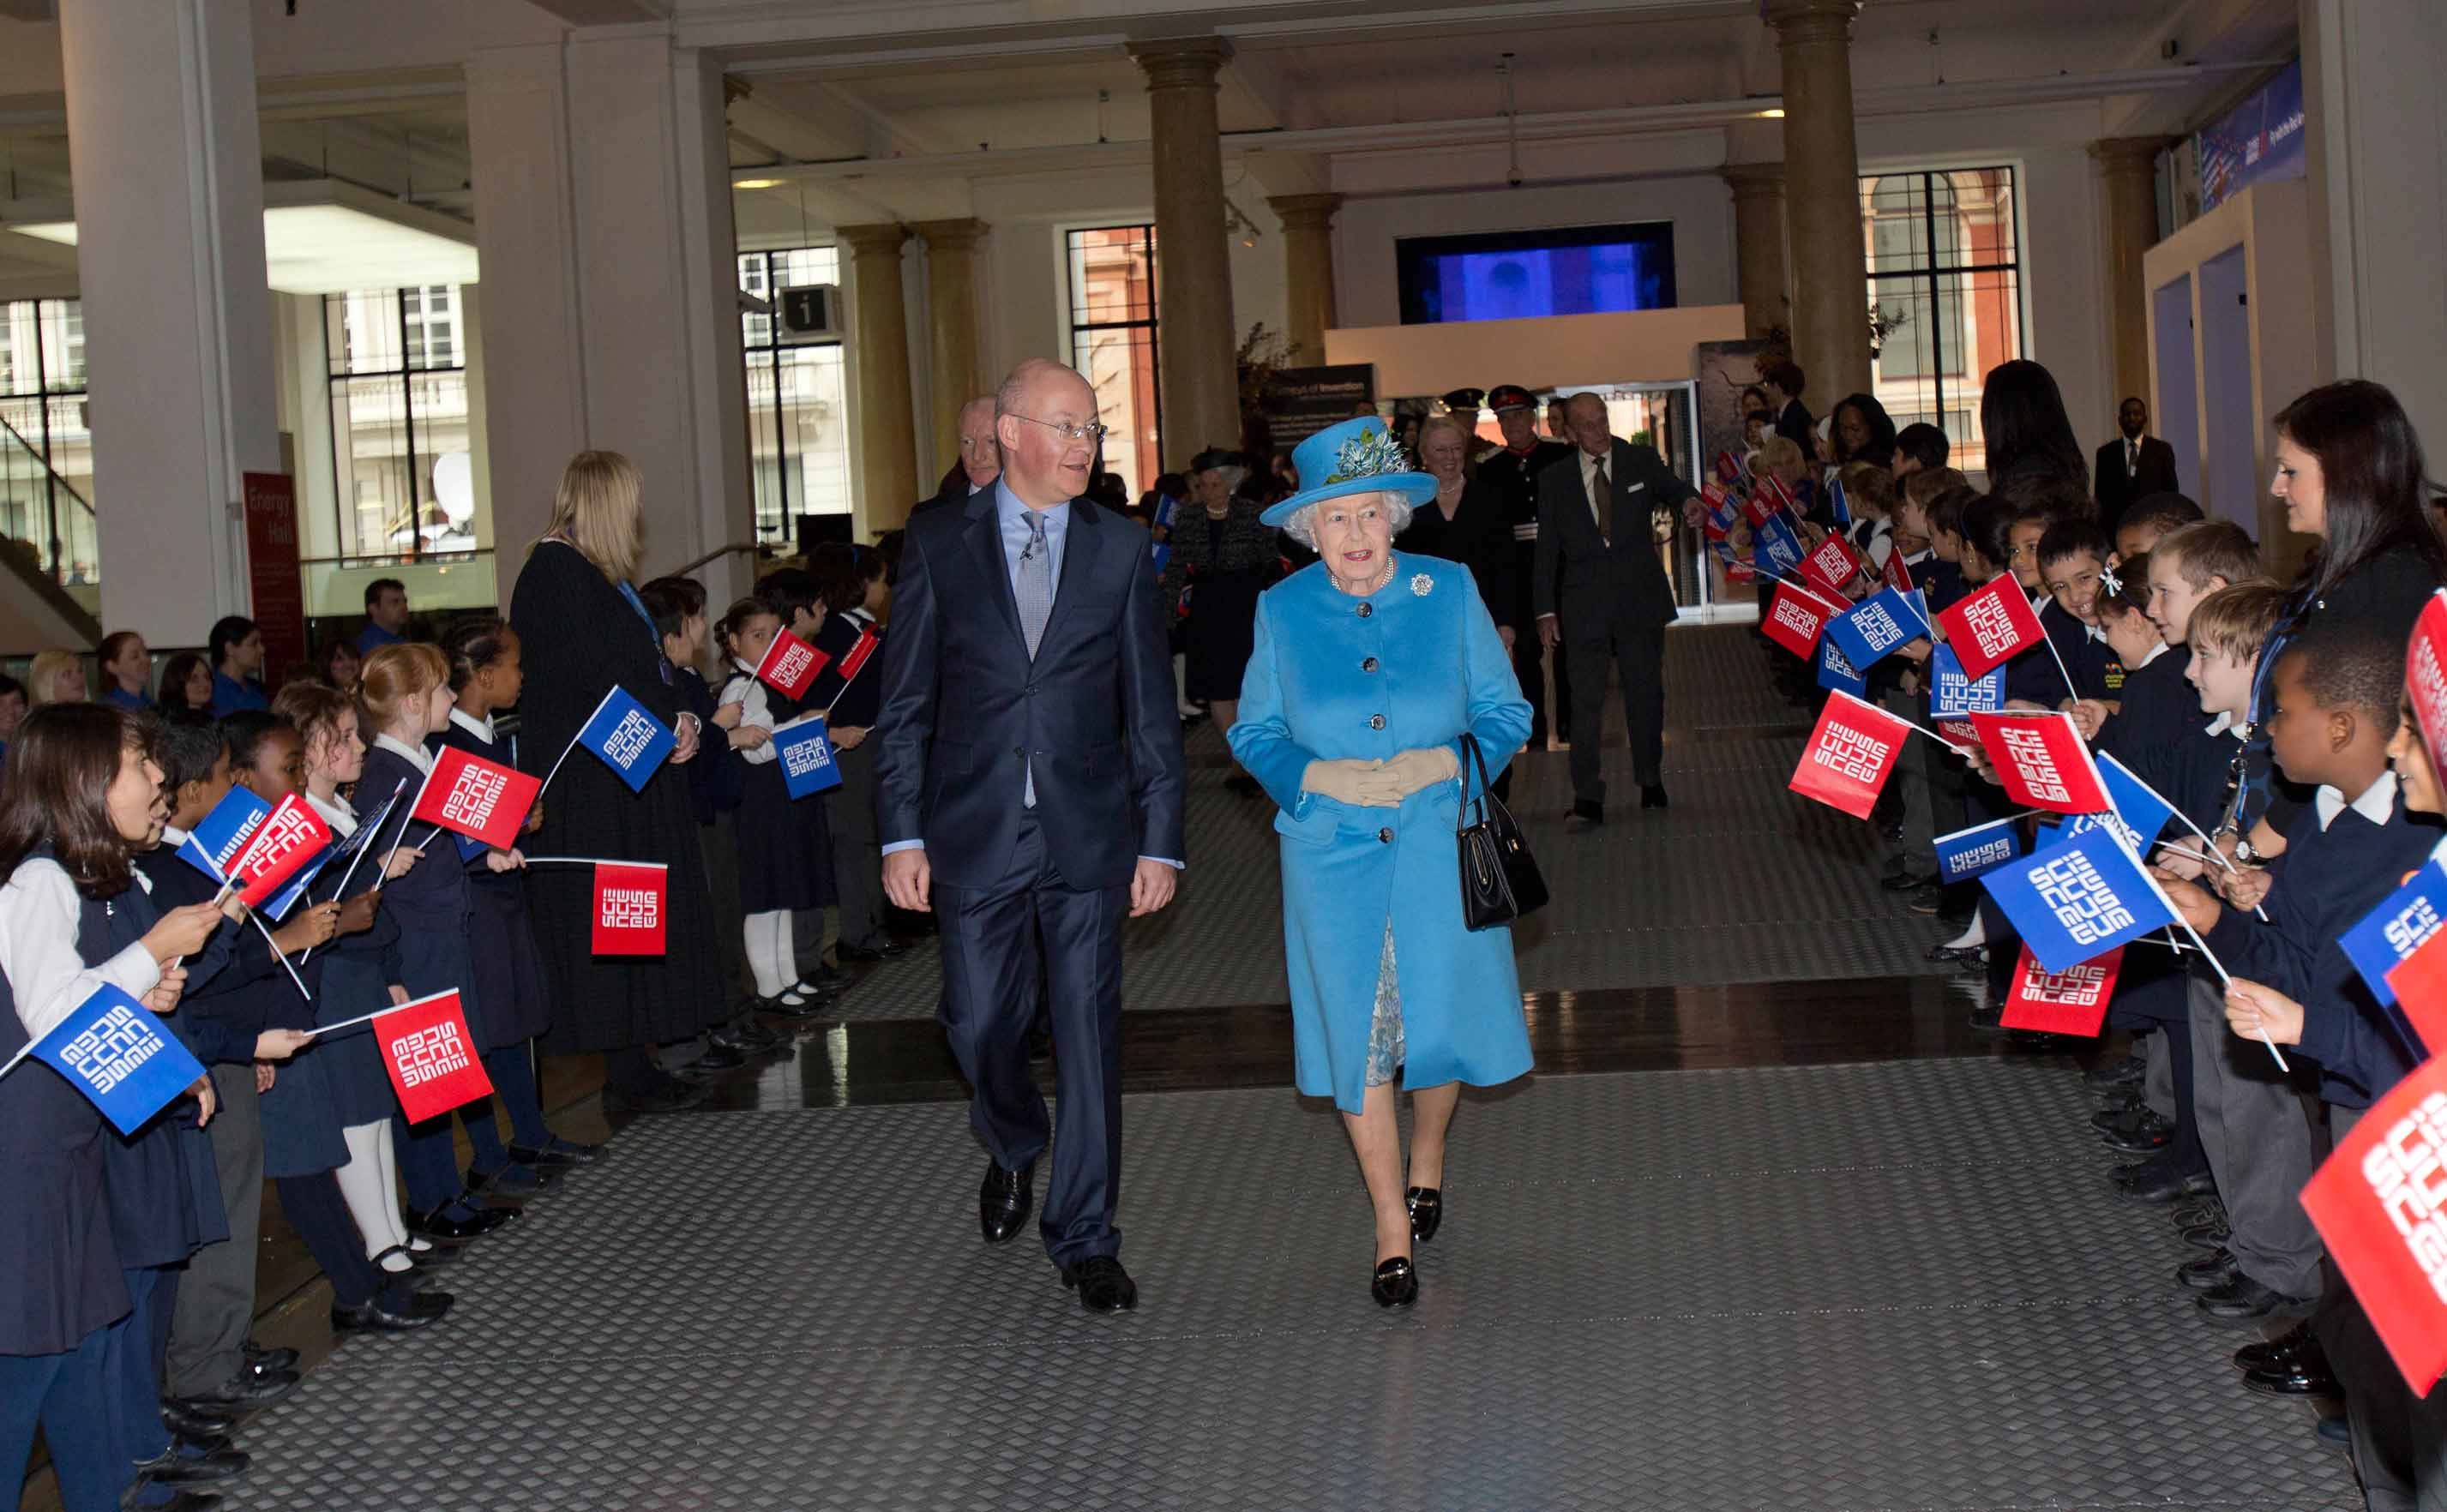 The Queen is greeted by school children as she enters the Museum with Science Museum Director Ian Blatchford. Image credit: Tim Anderson